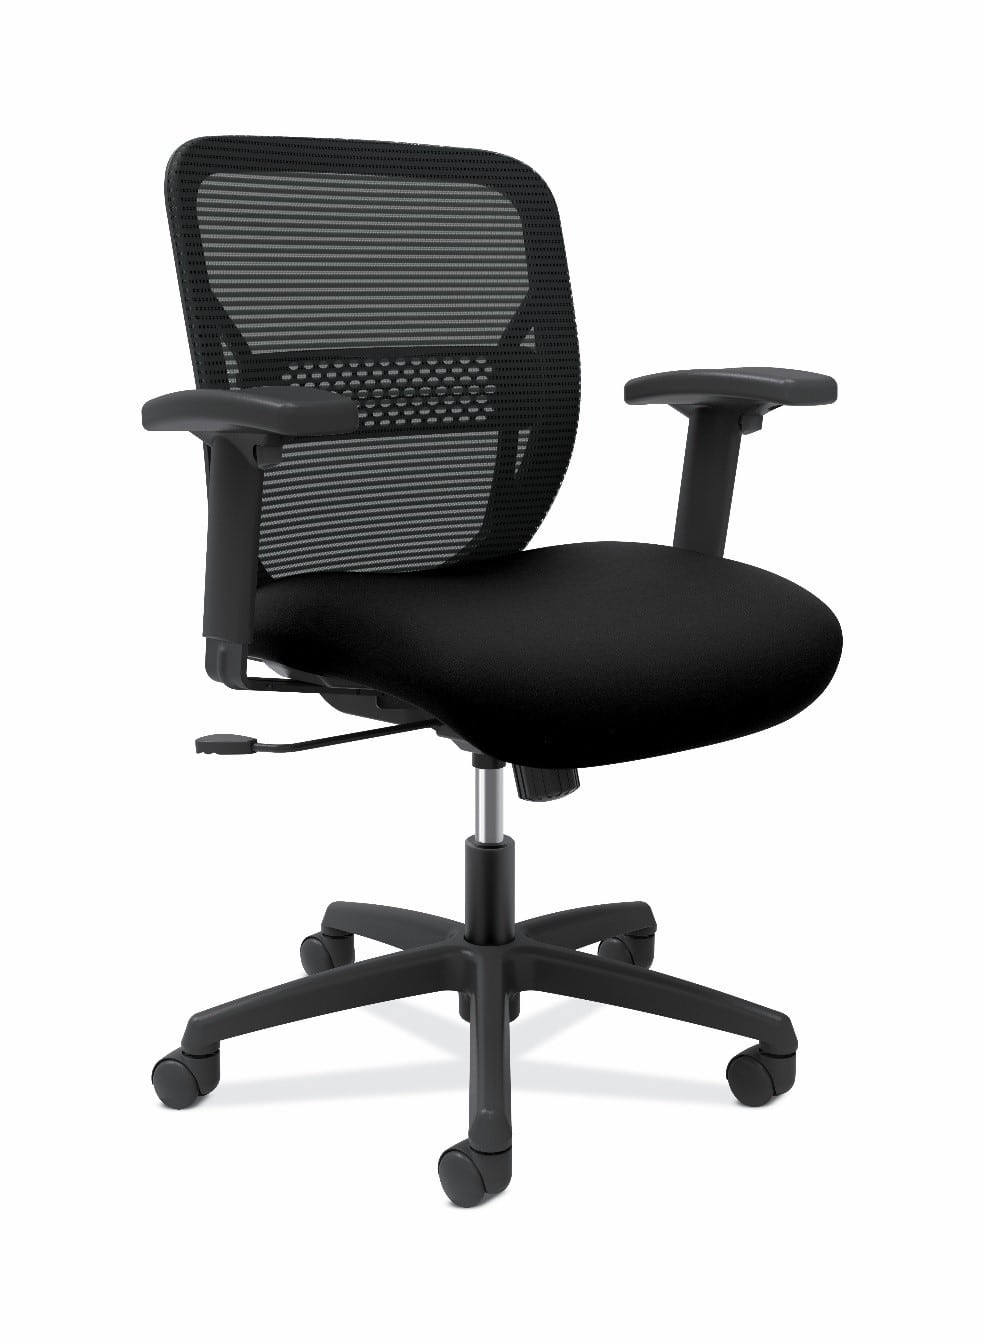 HON and Maxon Office Chairs Recalled for Injury Hazard